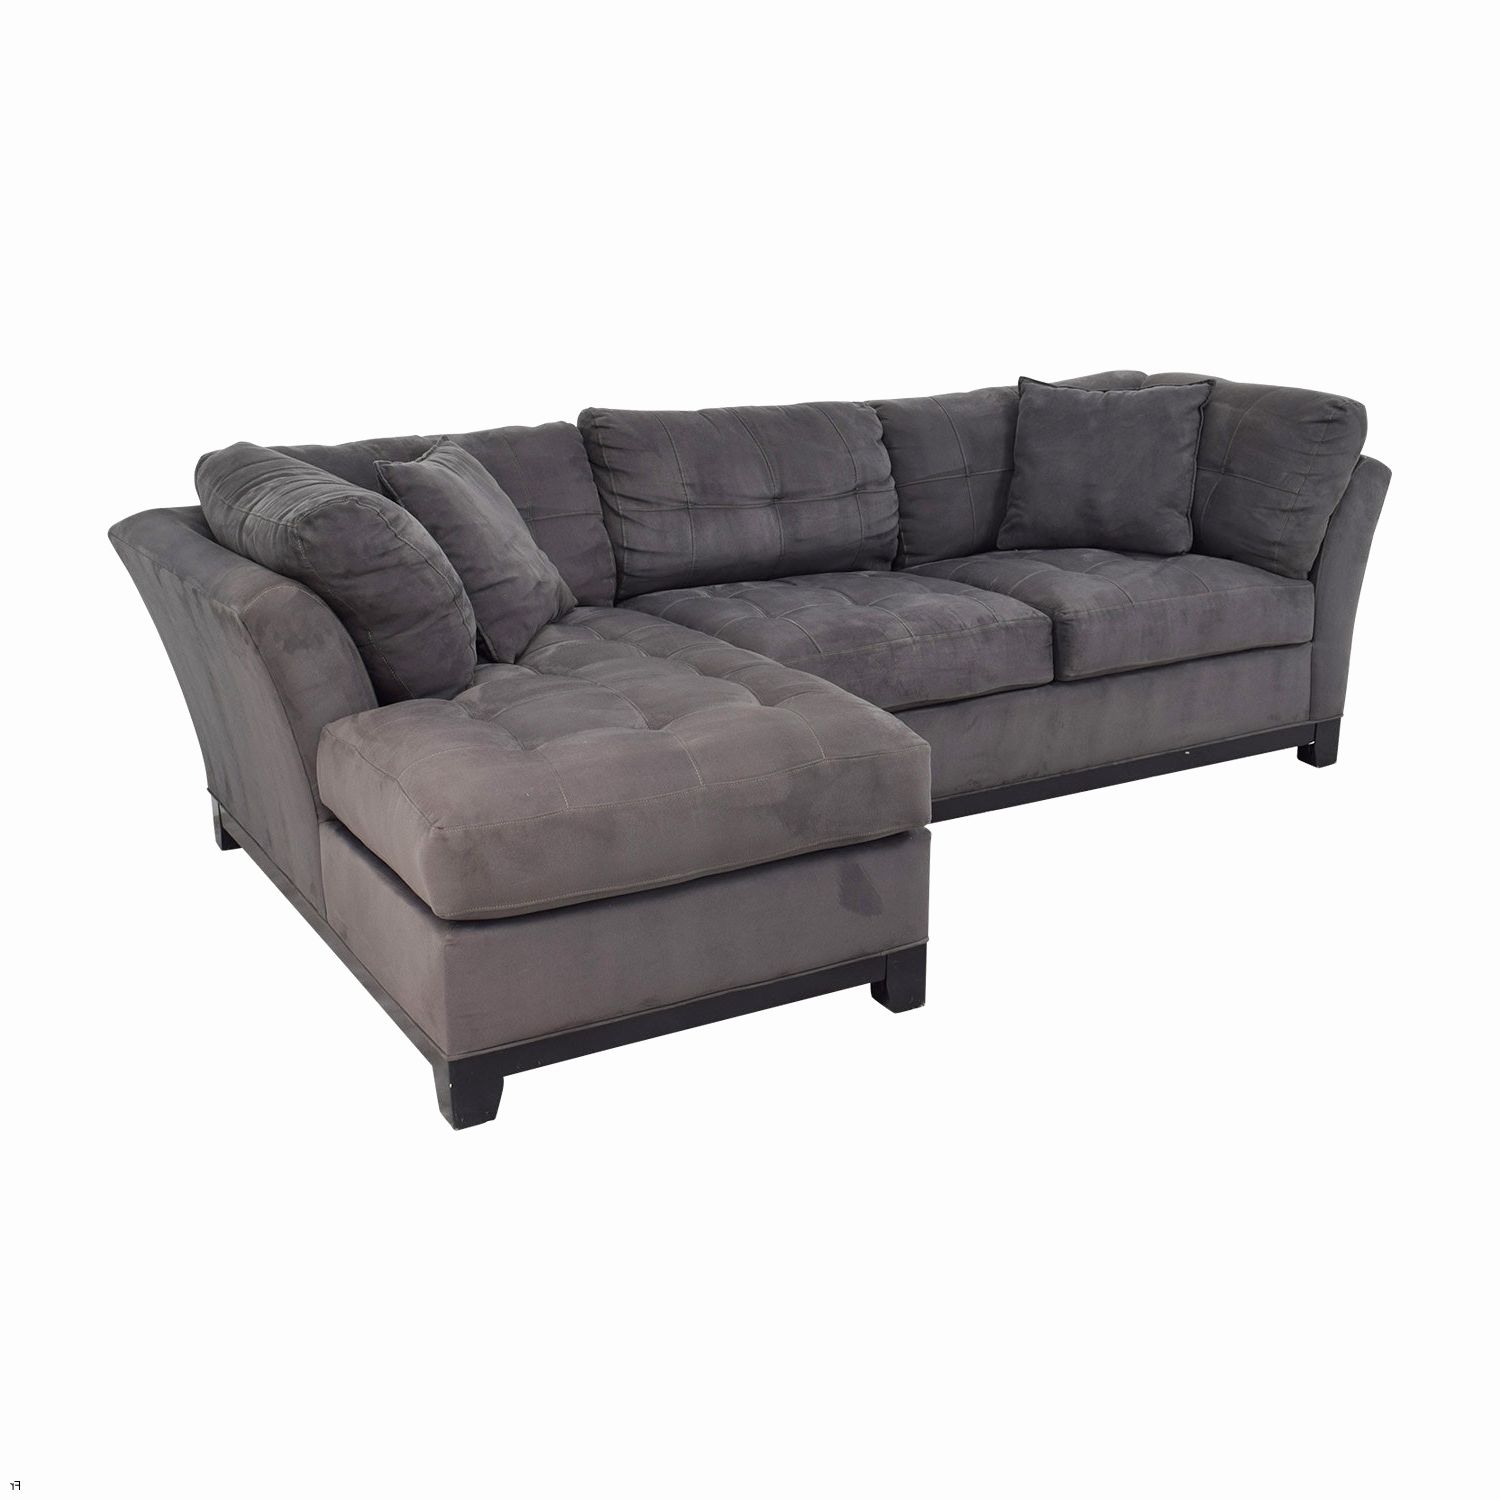 Sectional Sofas At Raymour And Flanigan Regarding Best And Newest Awesome 7 Seat Sectional Sofa Pictures – Home Design (View 6 of 20)